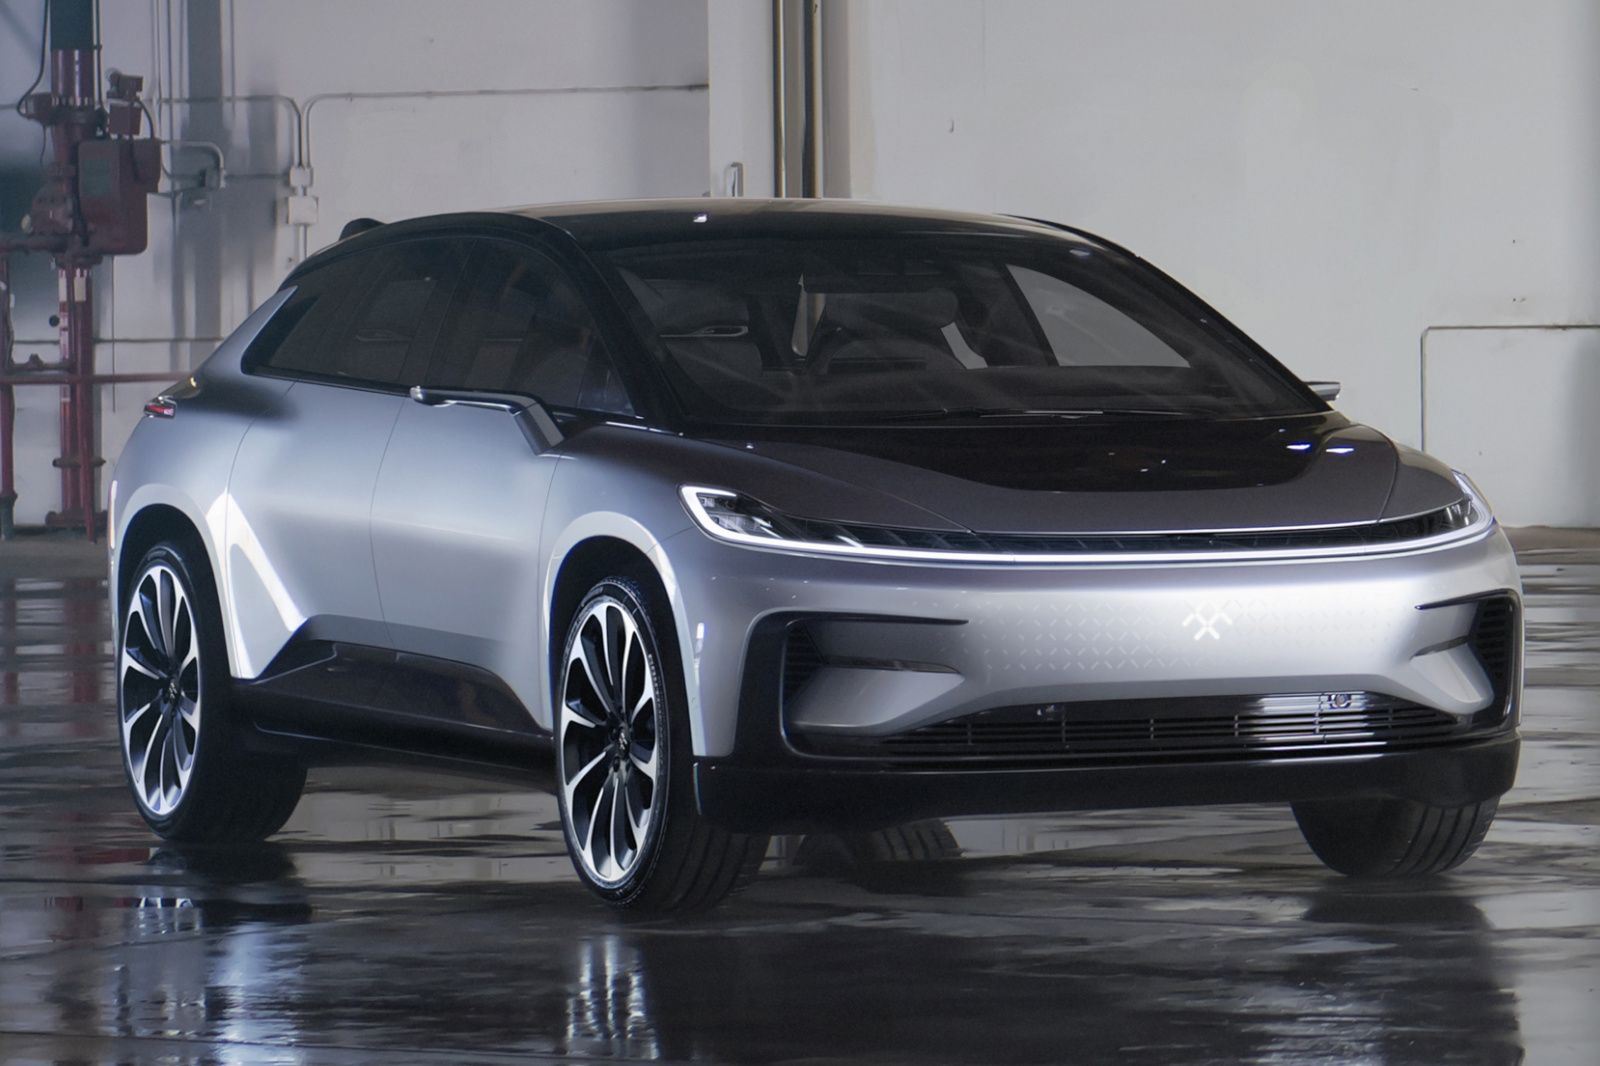 faraday future s first production car ff 91 hits the road in 2018 image 5